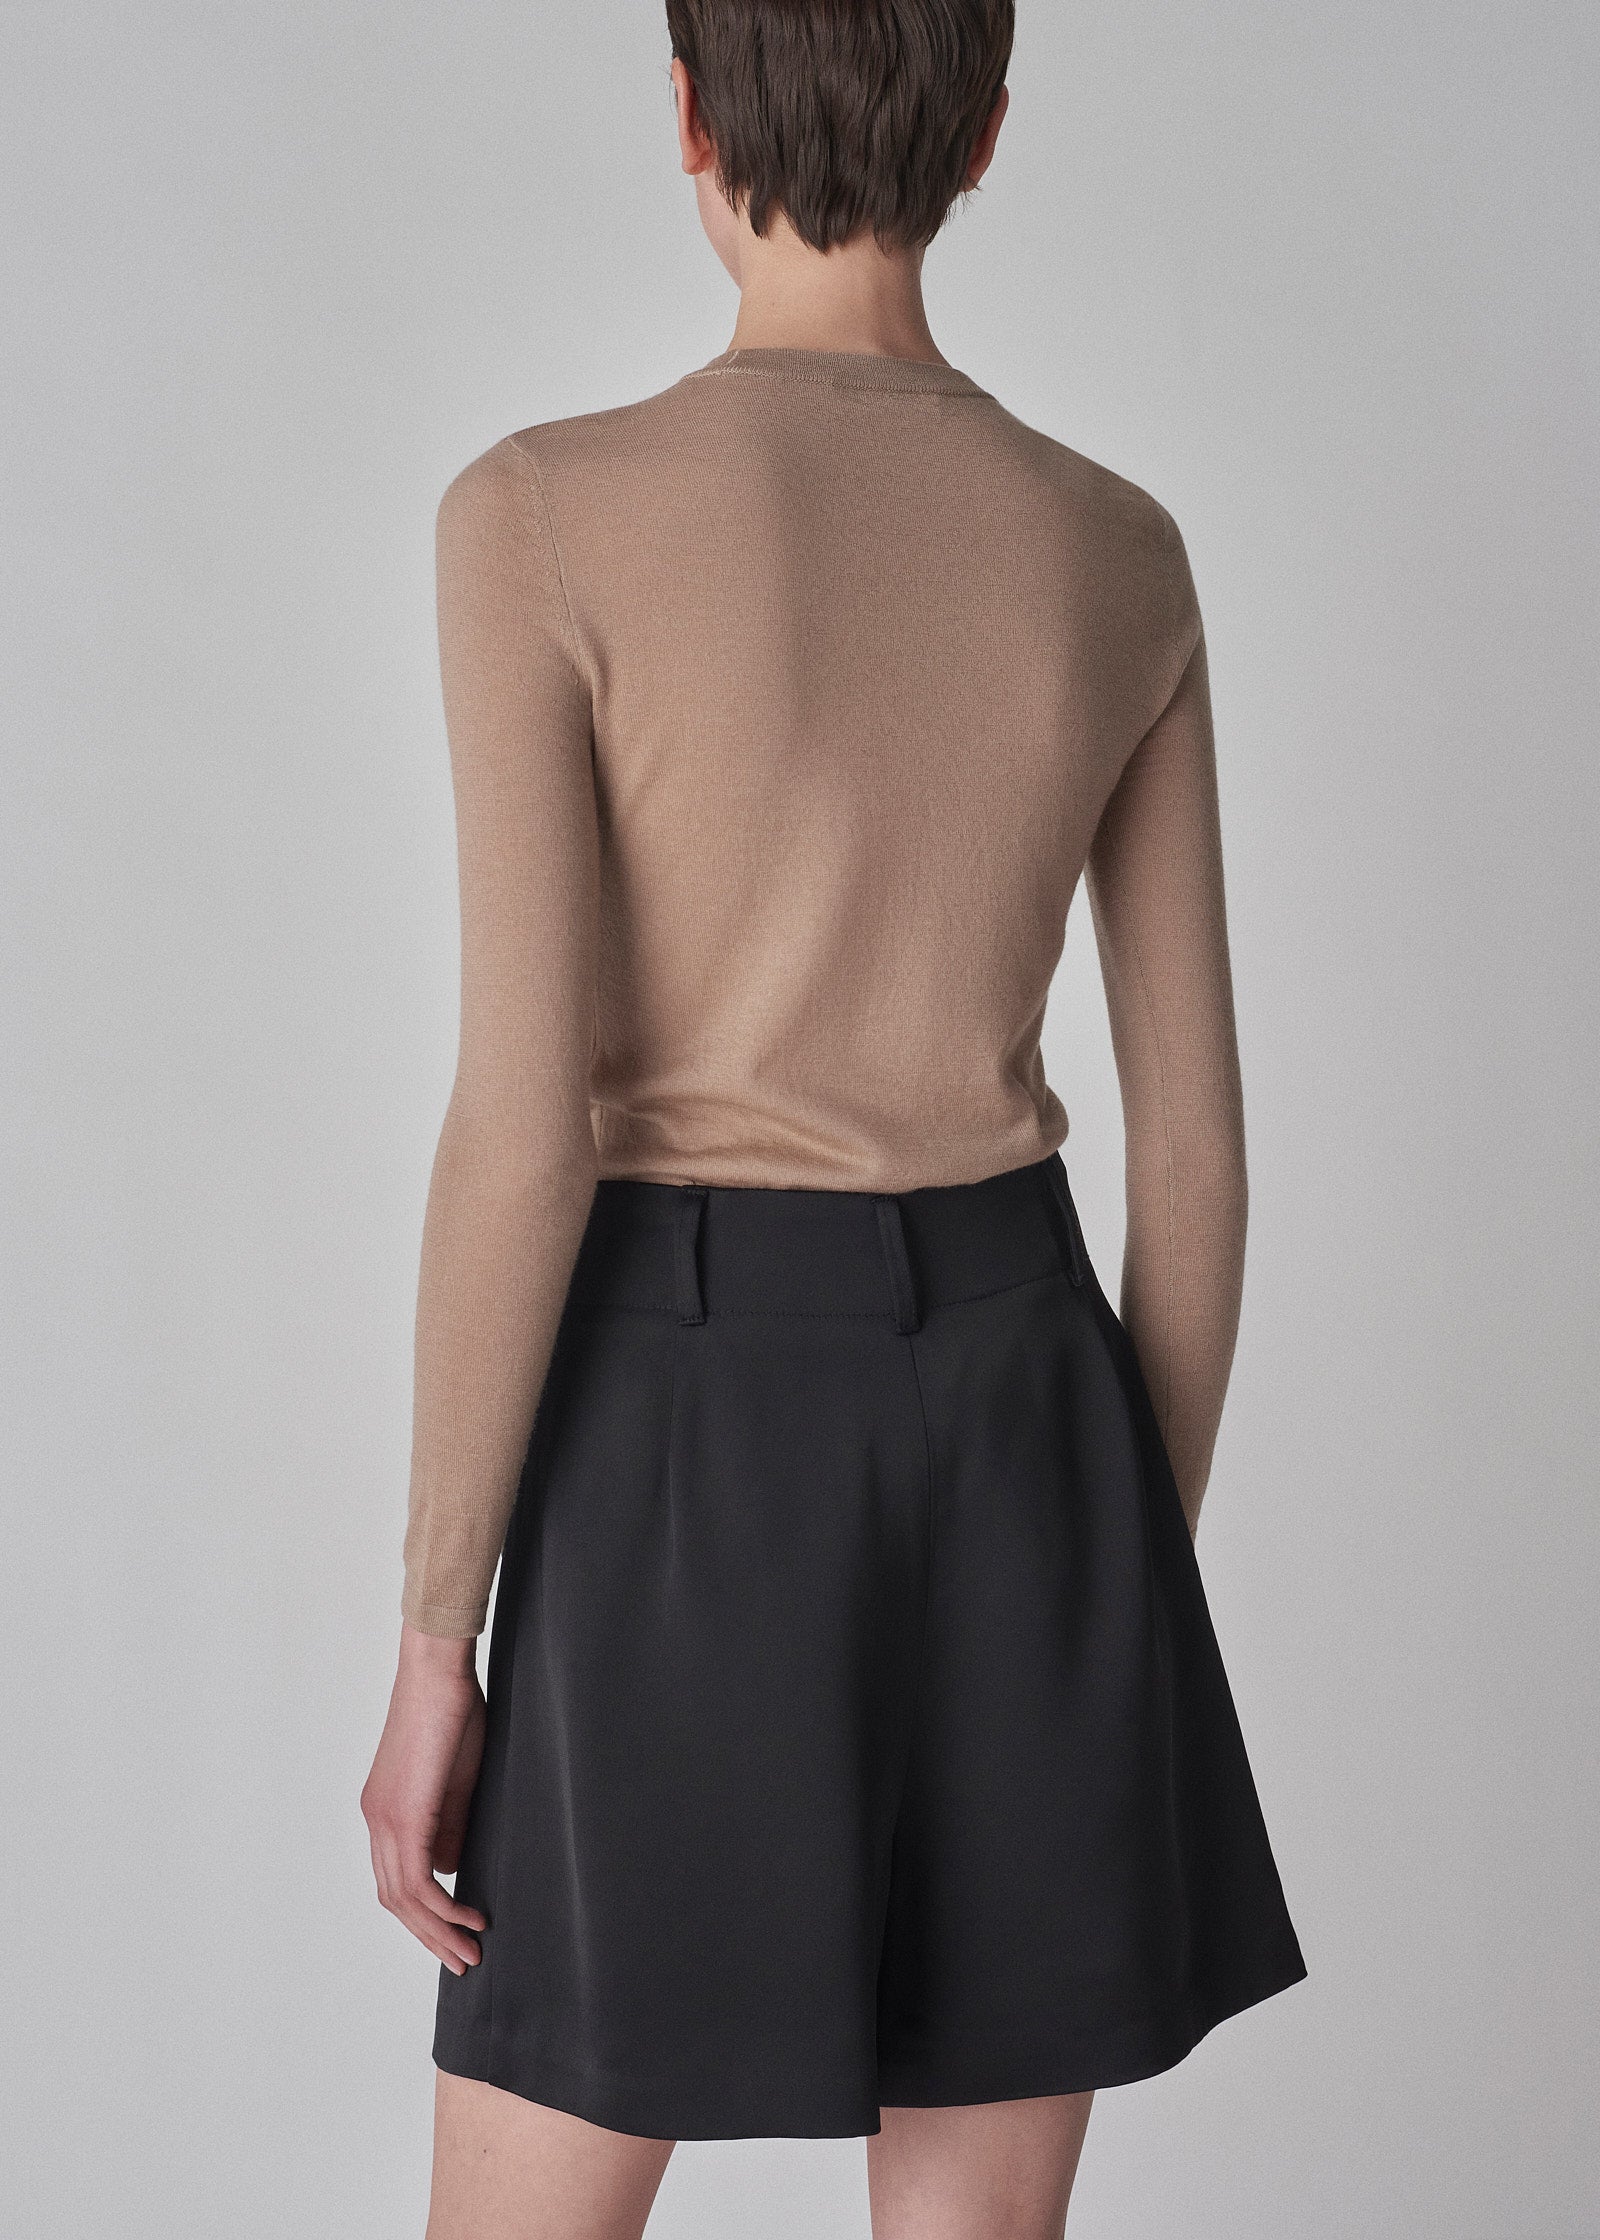 Long Sleeve Crew Neck Tee in Fine Cashmere - Taupe - CO Collections